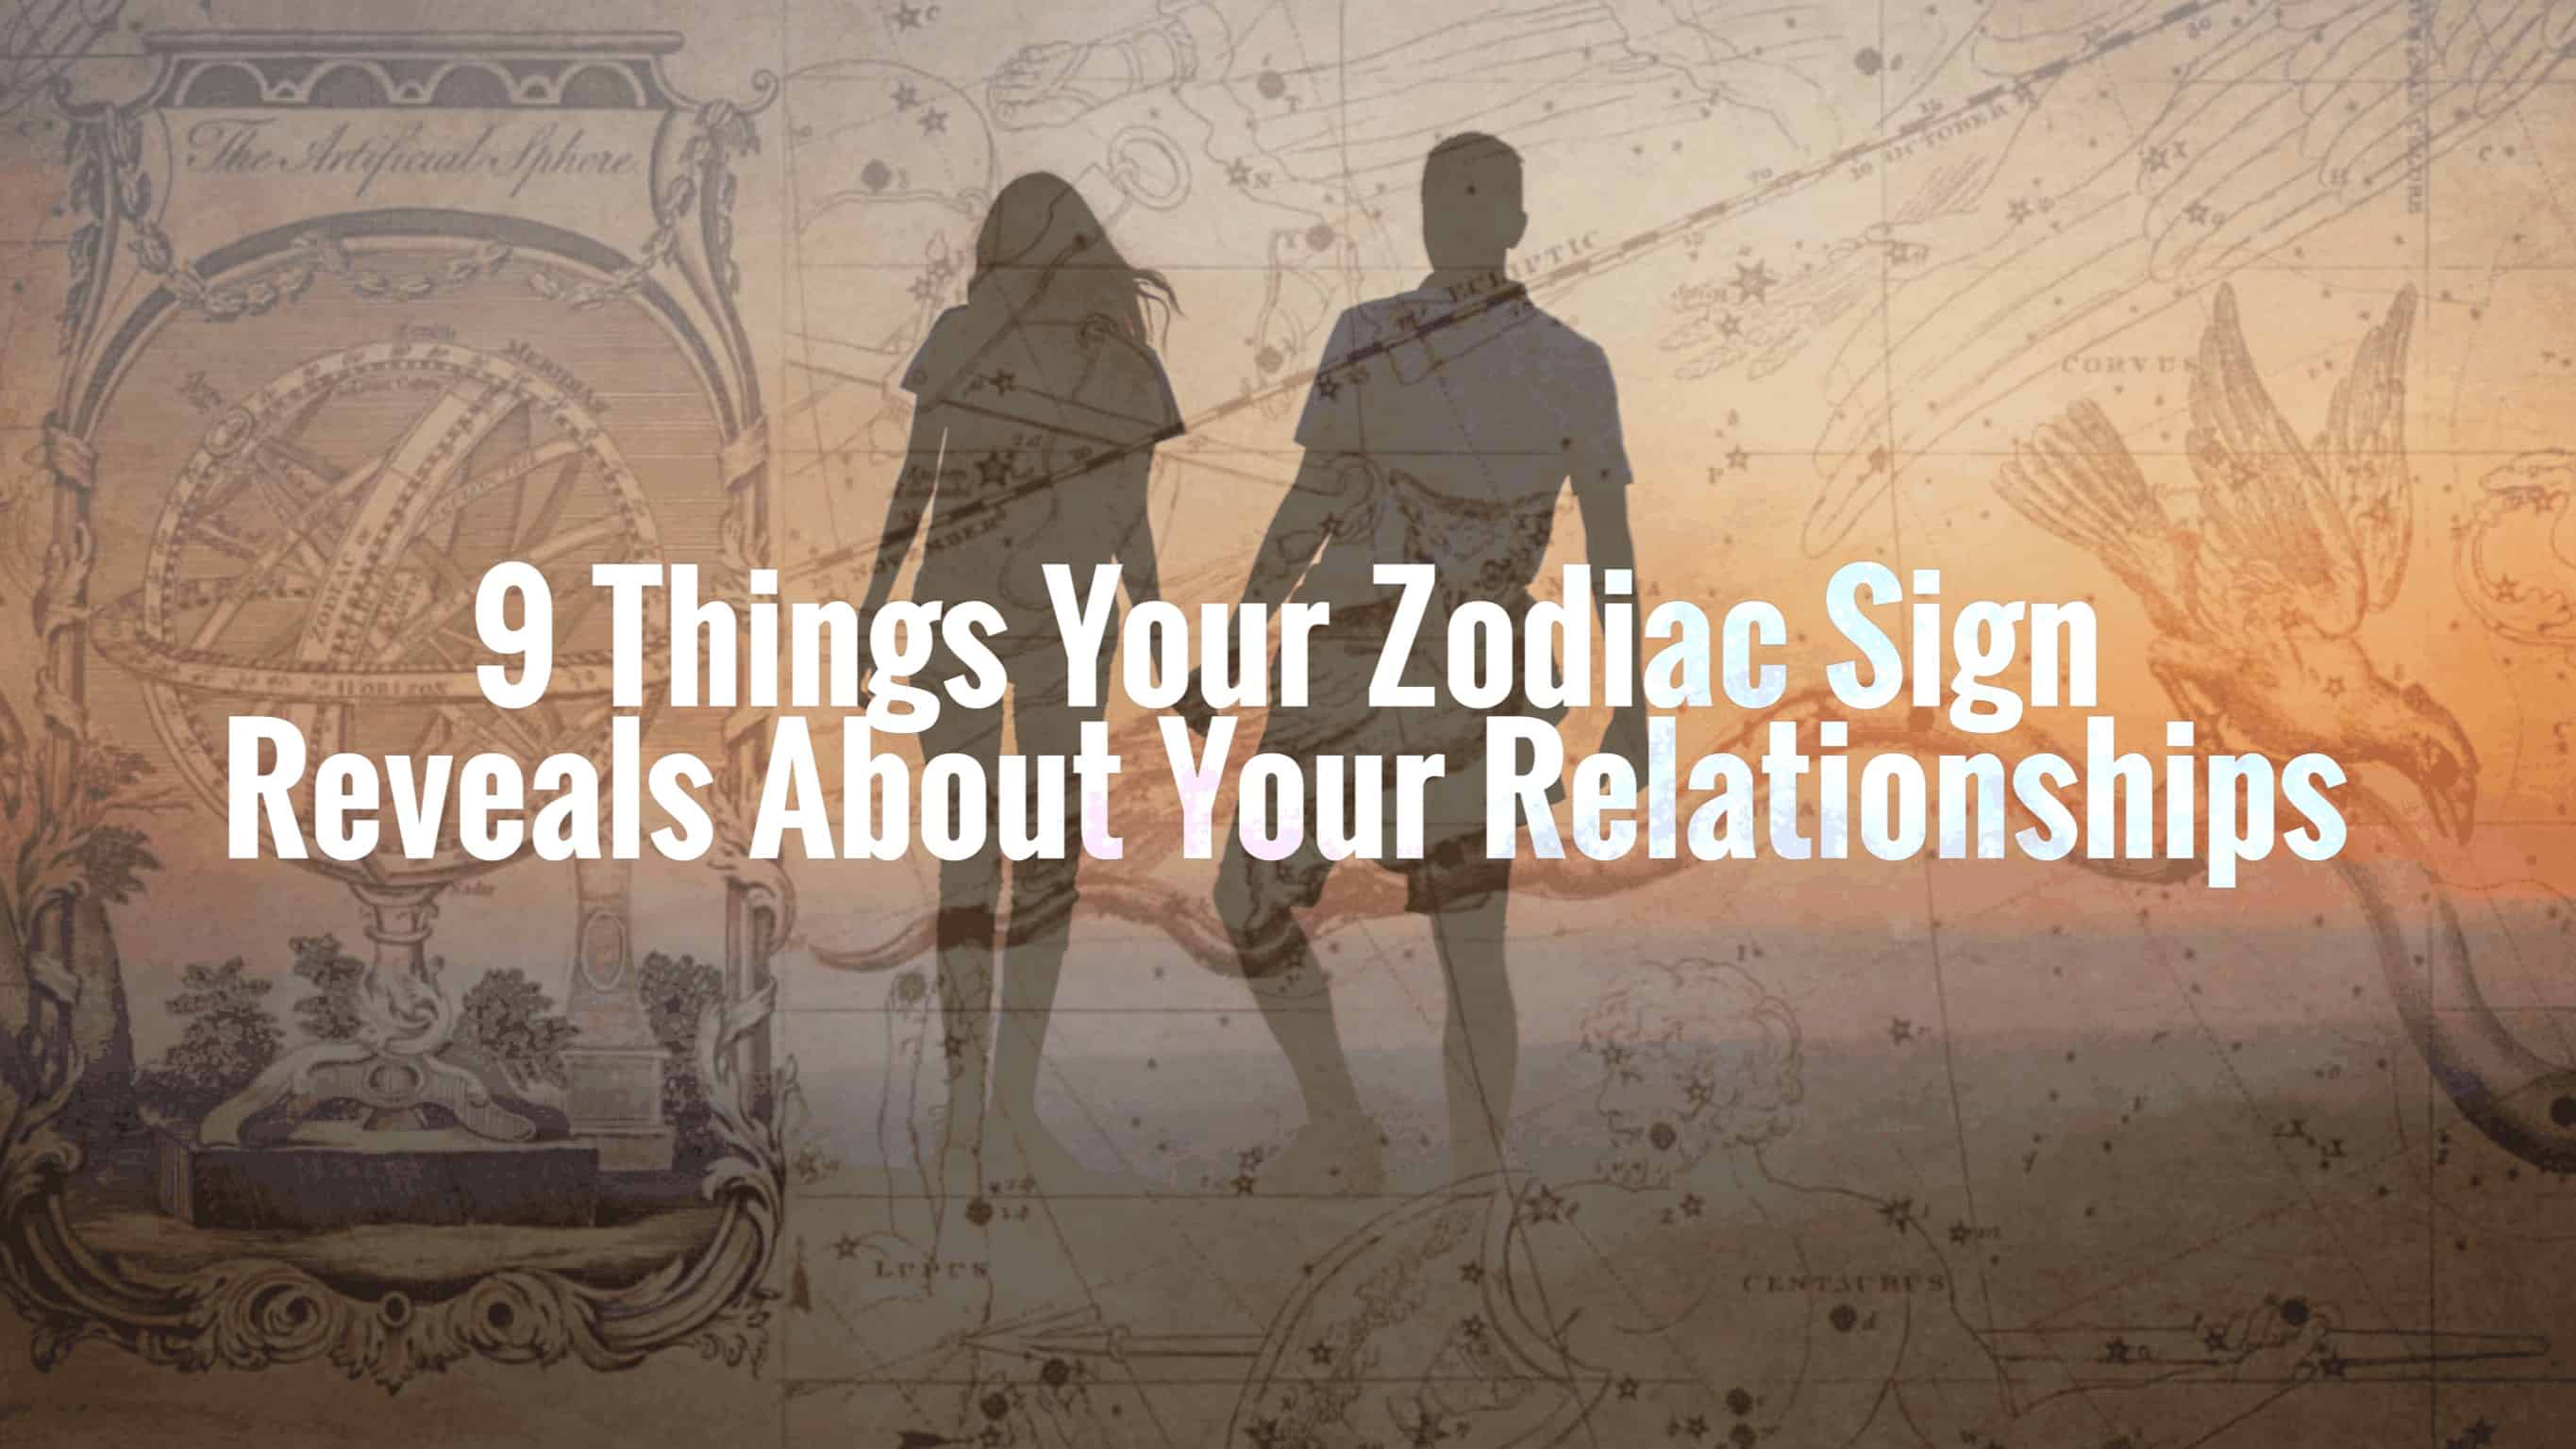 9 Things Your Zodiac Sign Reveals About Your Relationships